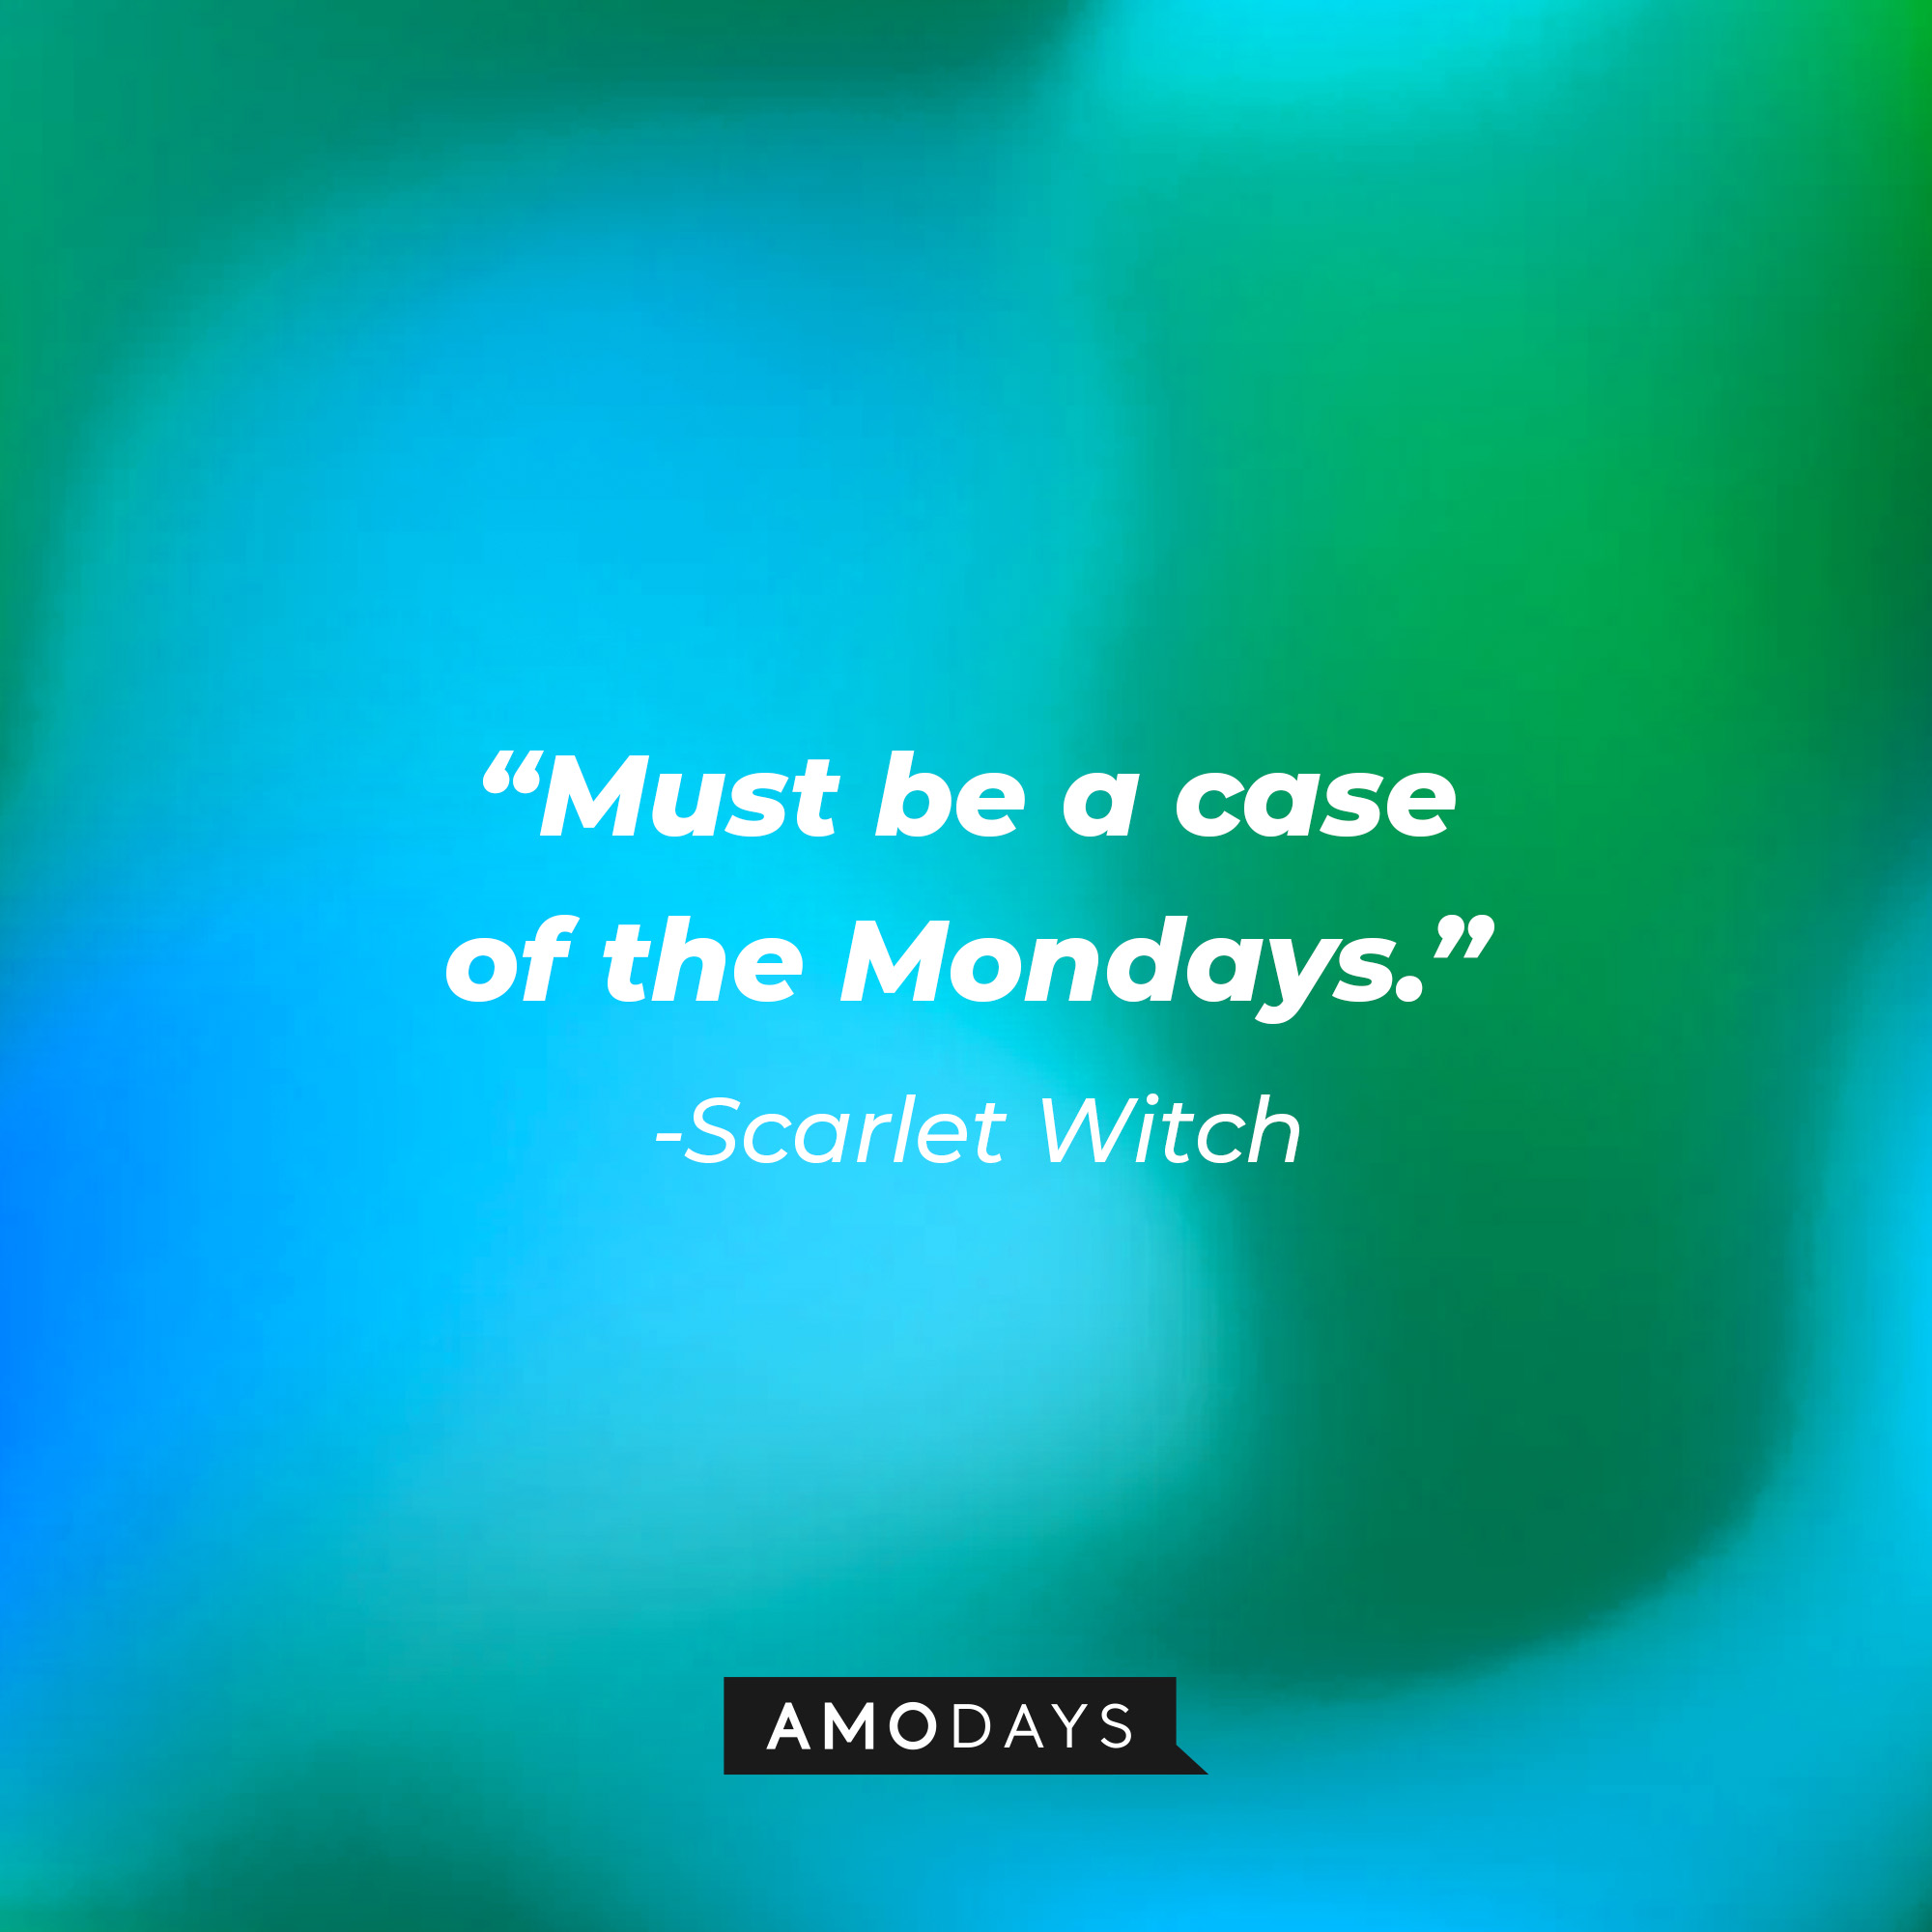 Scarlet Witch’s quote: “Must be a case of the Mondays.” | Source: AmoDays